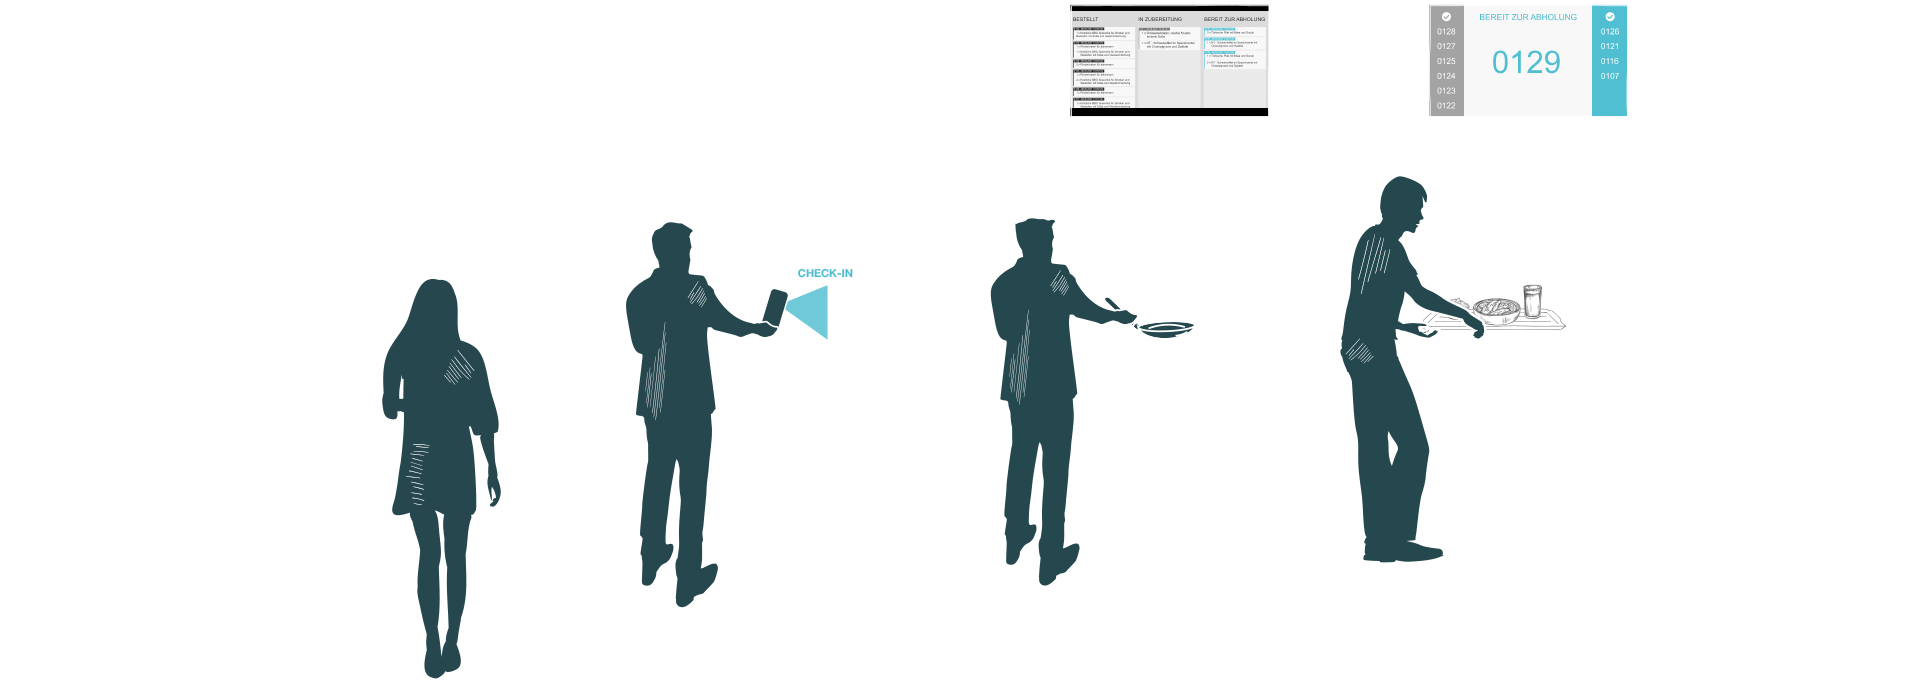 kamasys graphic check-in when entering the company restaurant